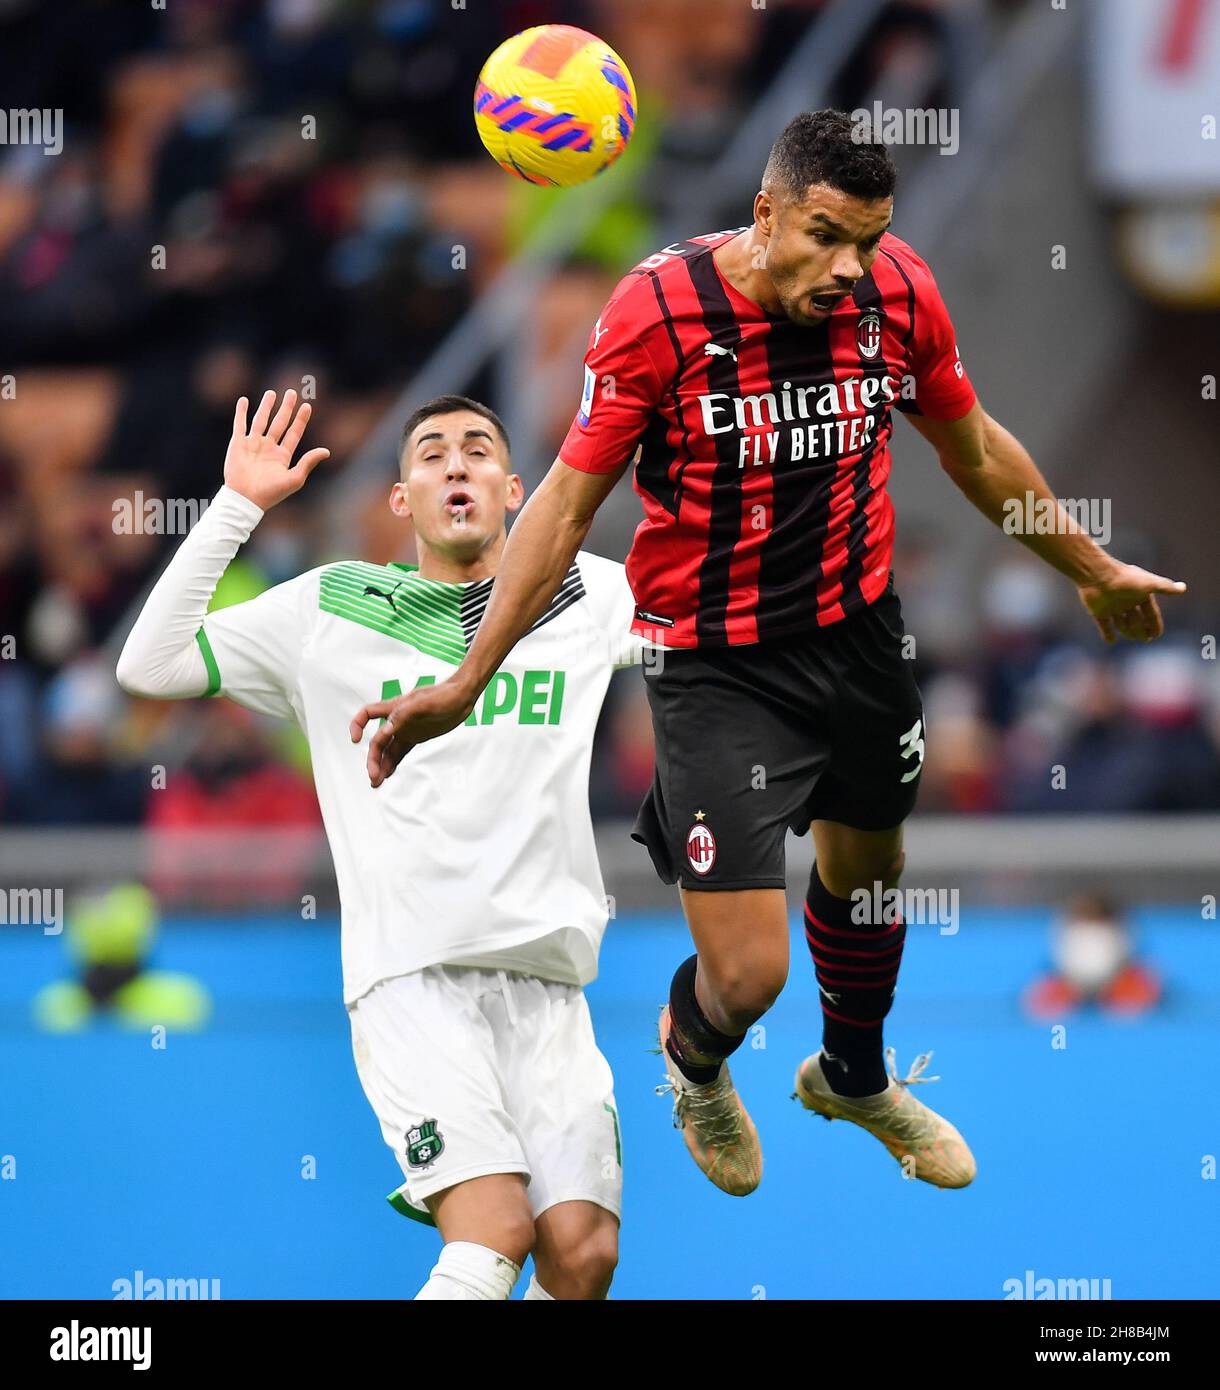 Milan, Italy. 28th Nov, 2021. AC Milan's Junior Messias (R) vies with  Sassuolo's Mert Muldur during a Serie A football match between AC Milan and  Sassuolo in Milan, Italy, Nov. 28, 2021.